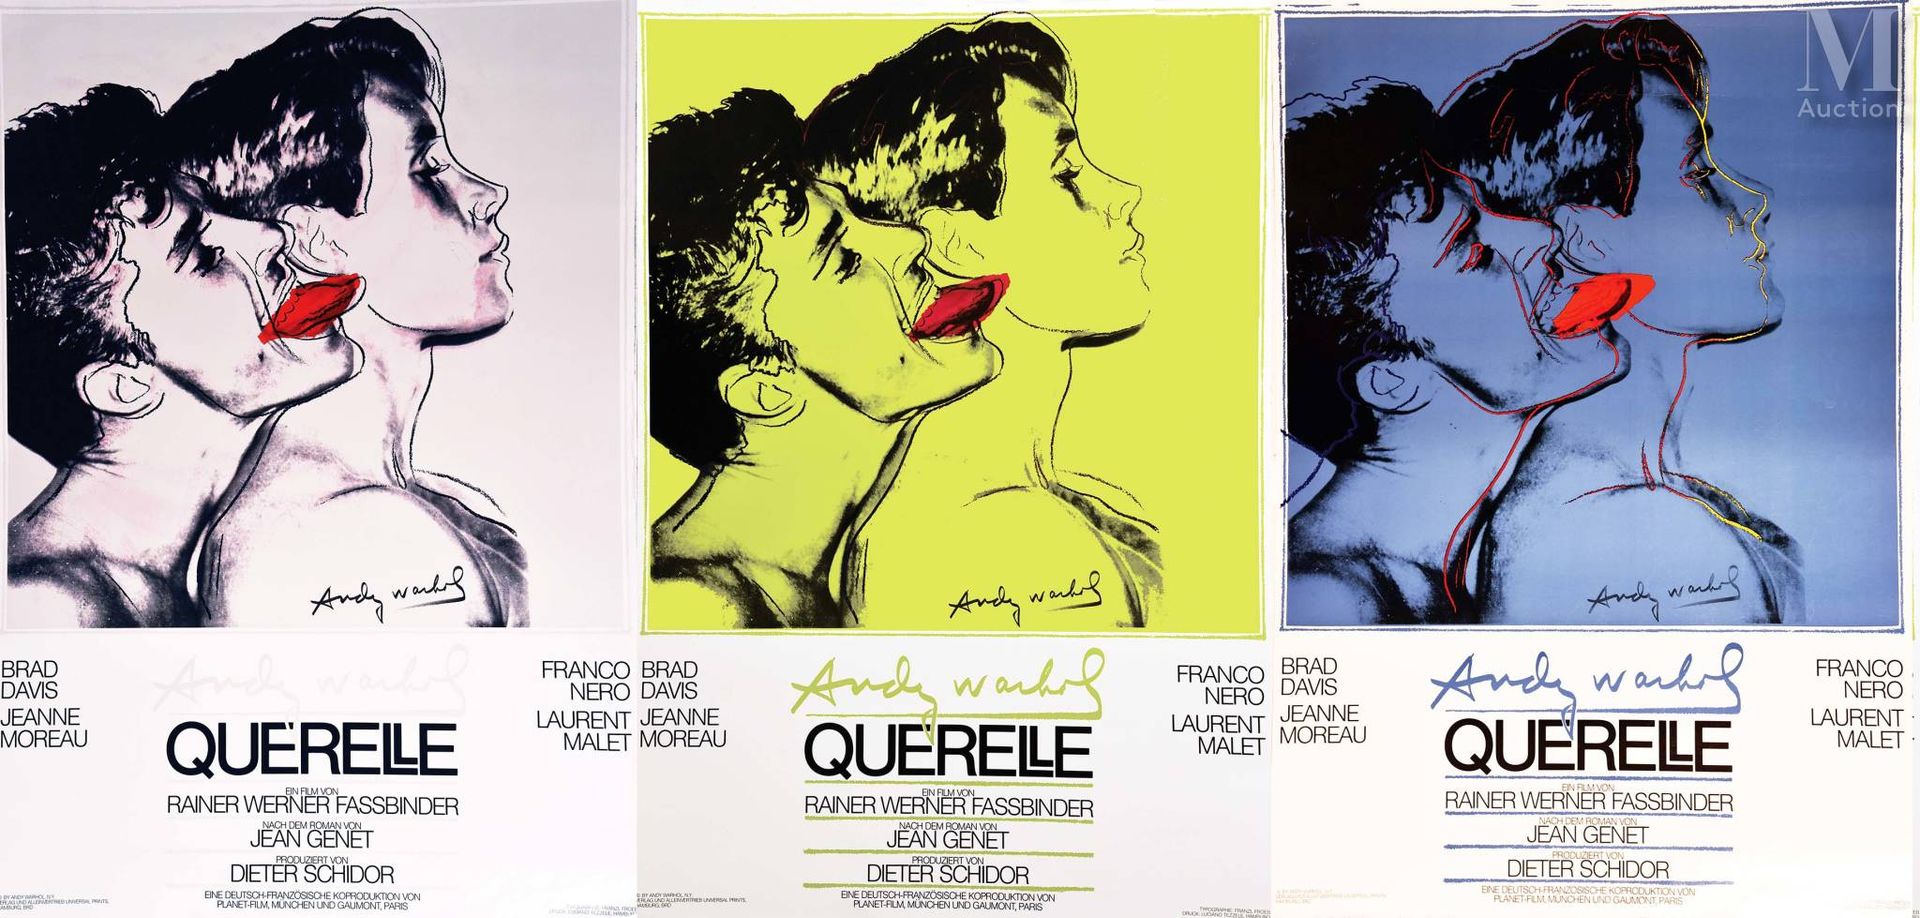 WARHOL ANDY Tryptique Querelle de Fasbinder par Andy Warhol
Tryptique Querelle d&hellip;